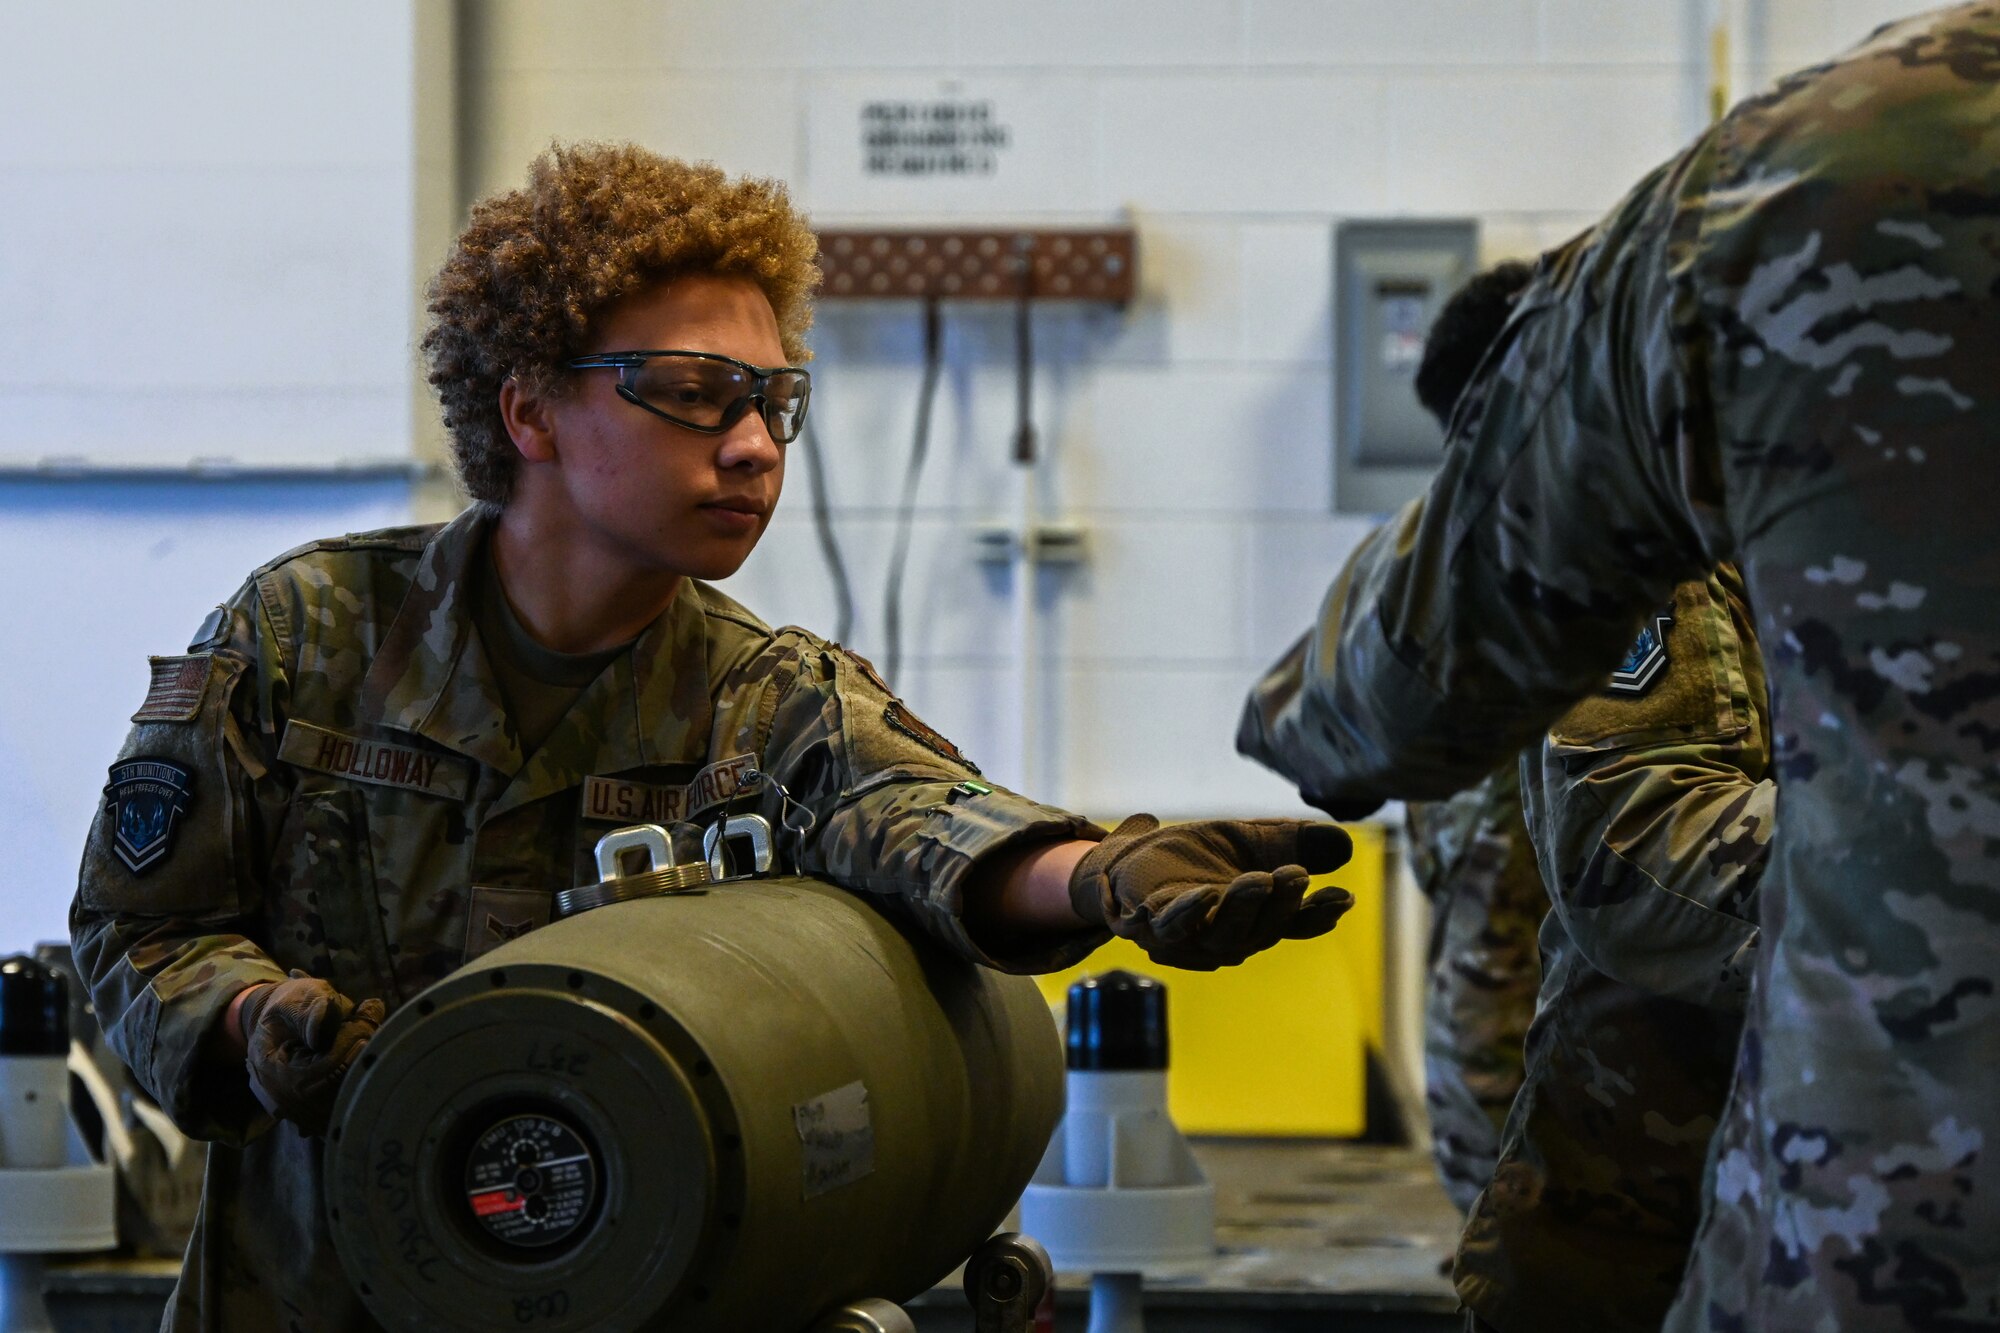 Airman 1st Class Amarissa Holloway, 5th Munitions Squadron munitions line delivery specialist, builds an Mk-82 ordnance during Operation Tundra Swan at Minot Air Force Base, North Dakota, Oct. 2, 2023. Munition systems Airmen like Holloway store, assemble, account for and transport weapons systems. (U.S. Air Force photo by Airman 1st Class Alyssa Bankston)